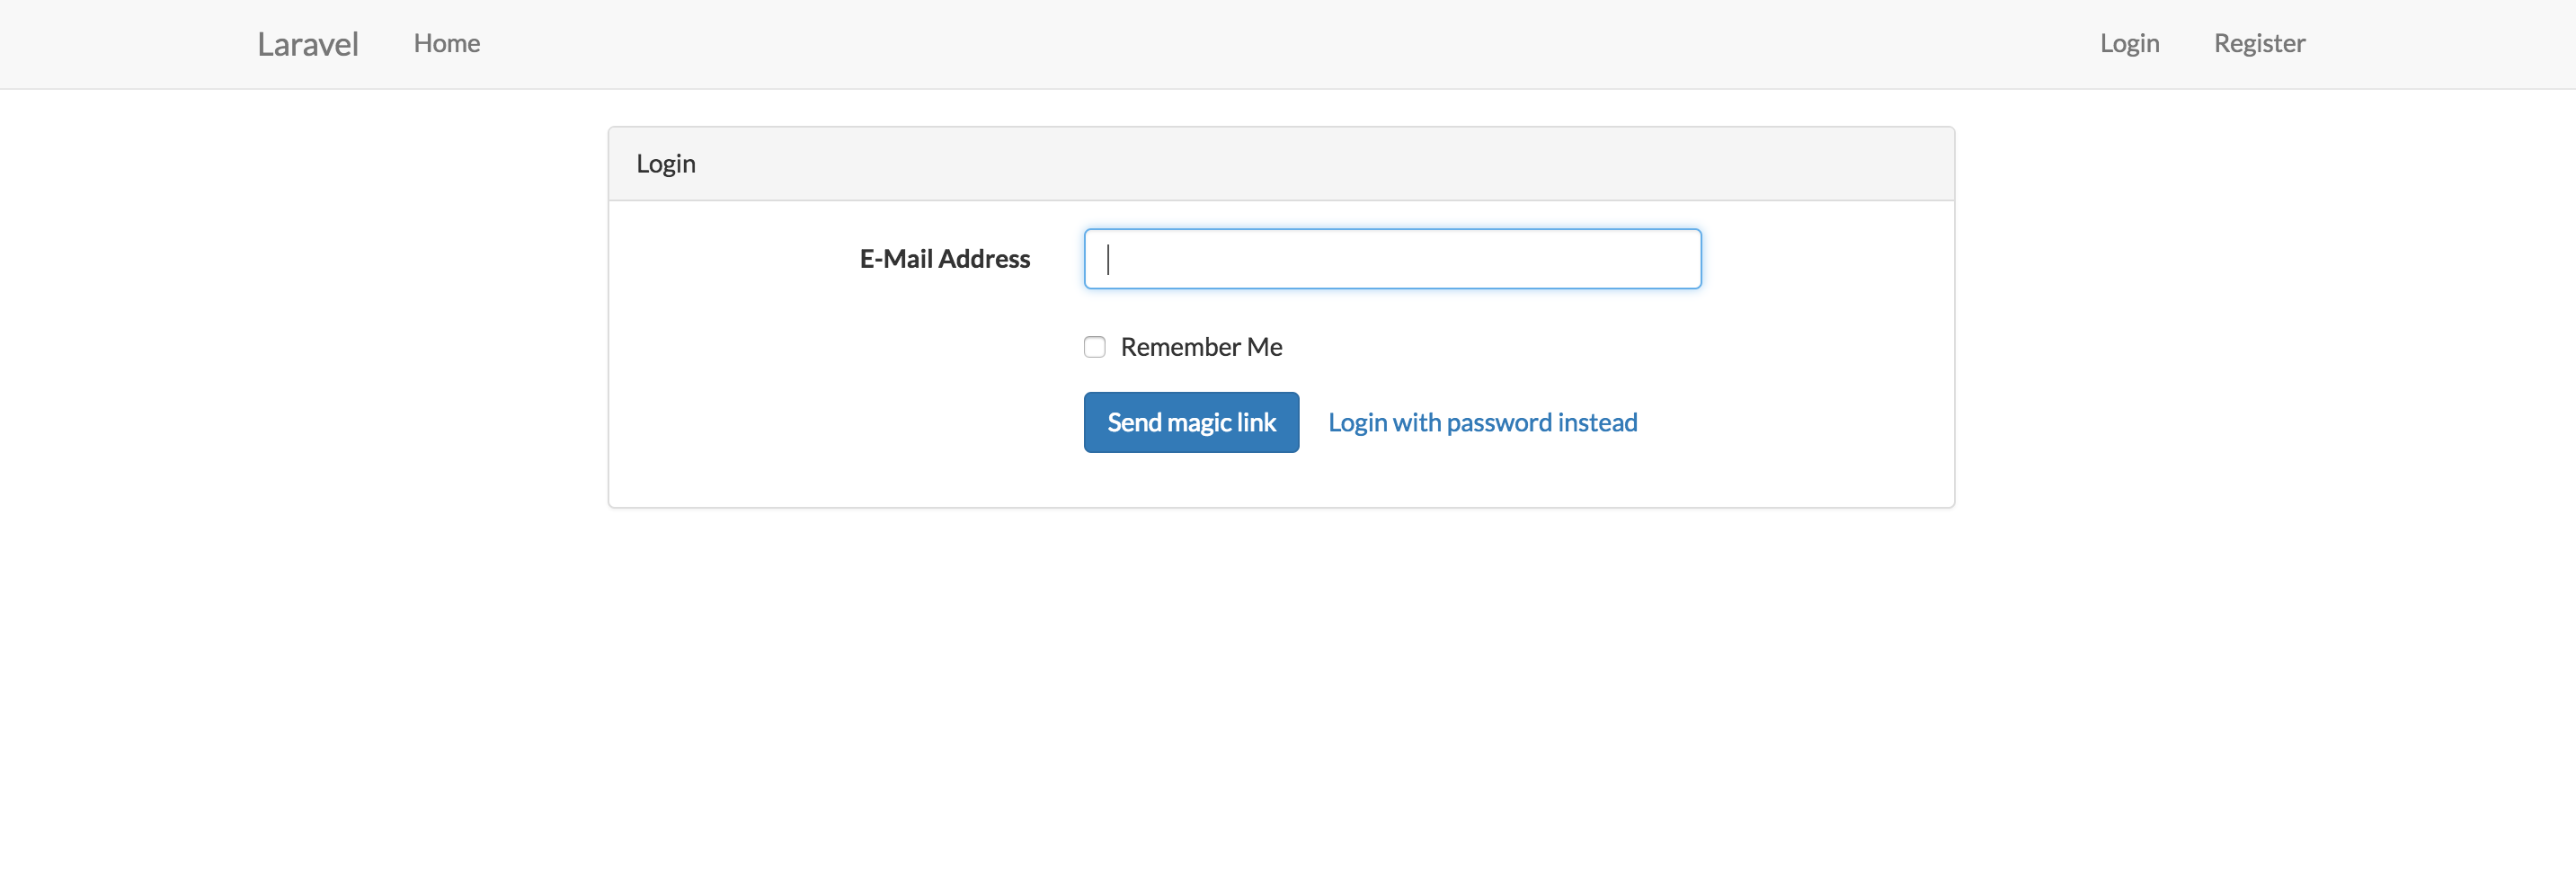 Example of view with login form